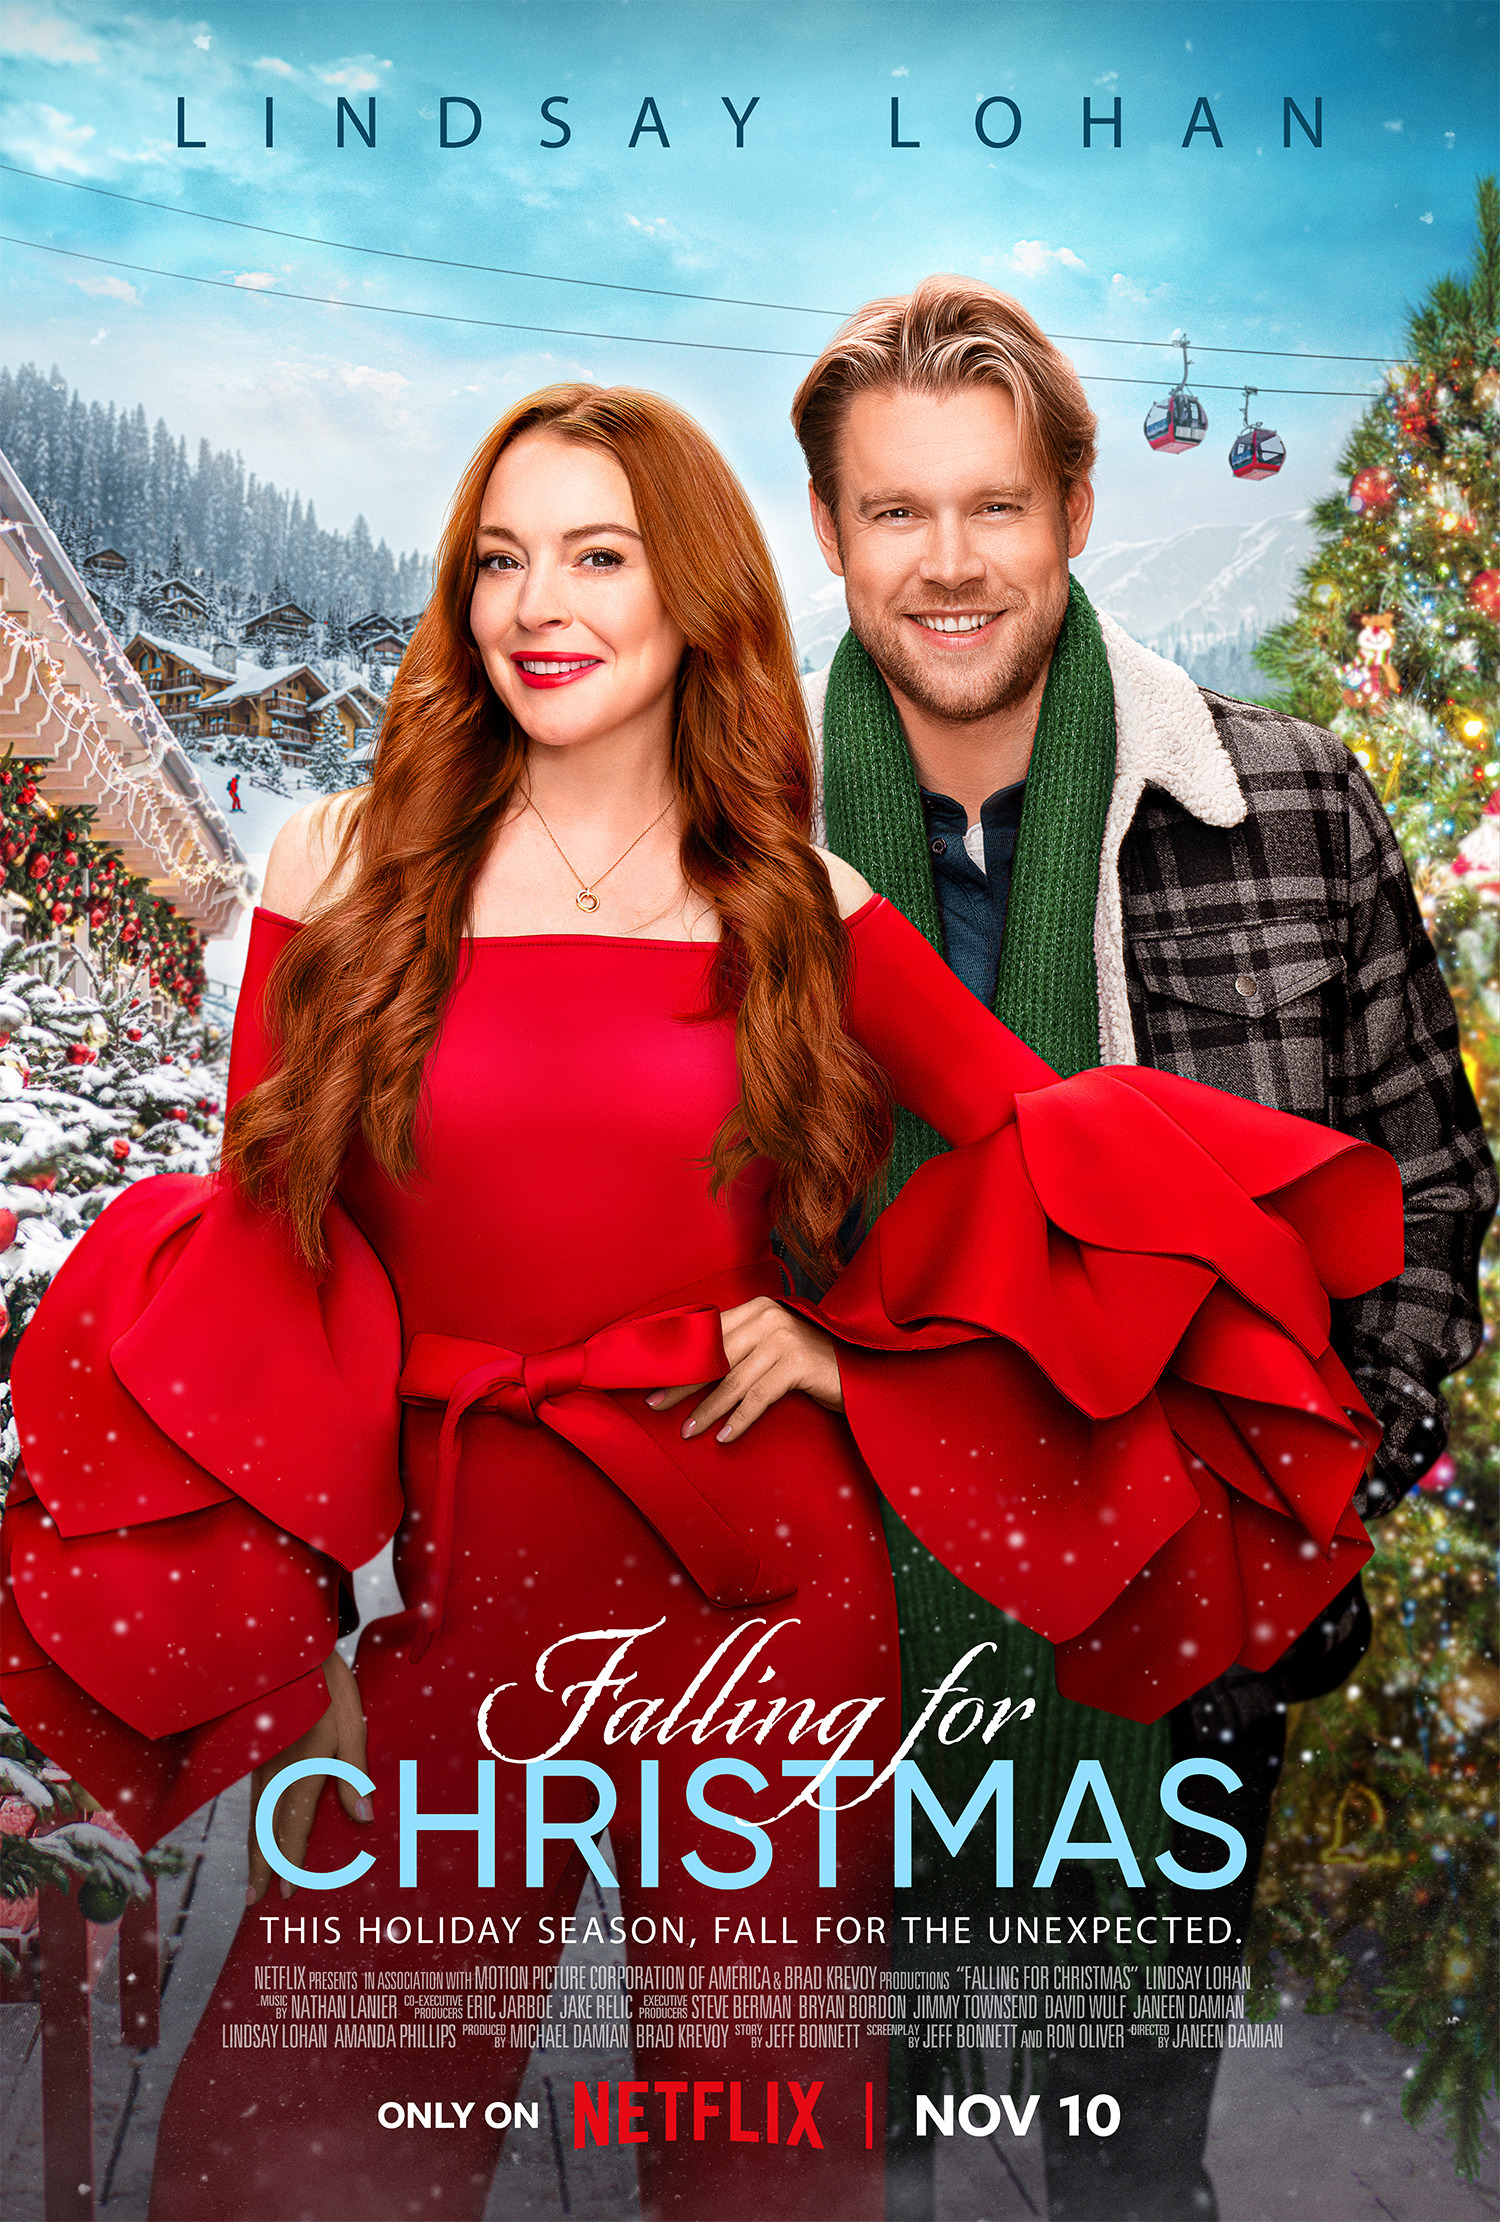 Mega Sized Movie Poster Image for Falling for Christmas 